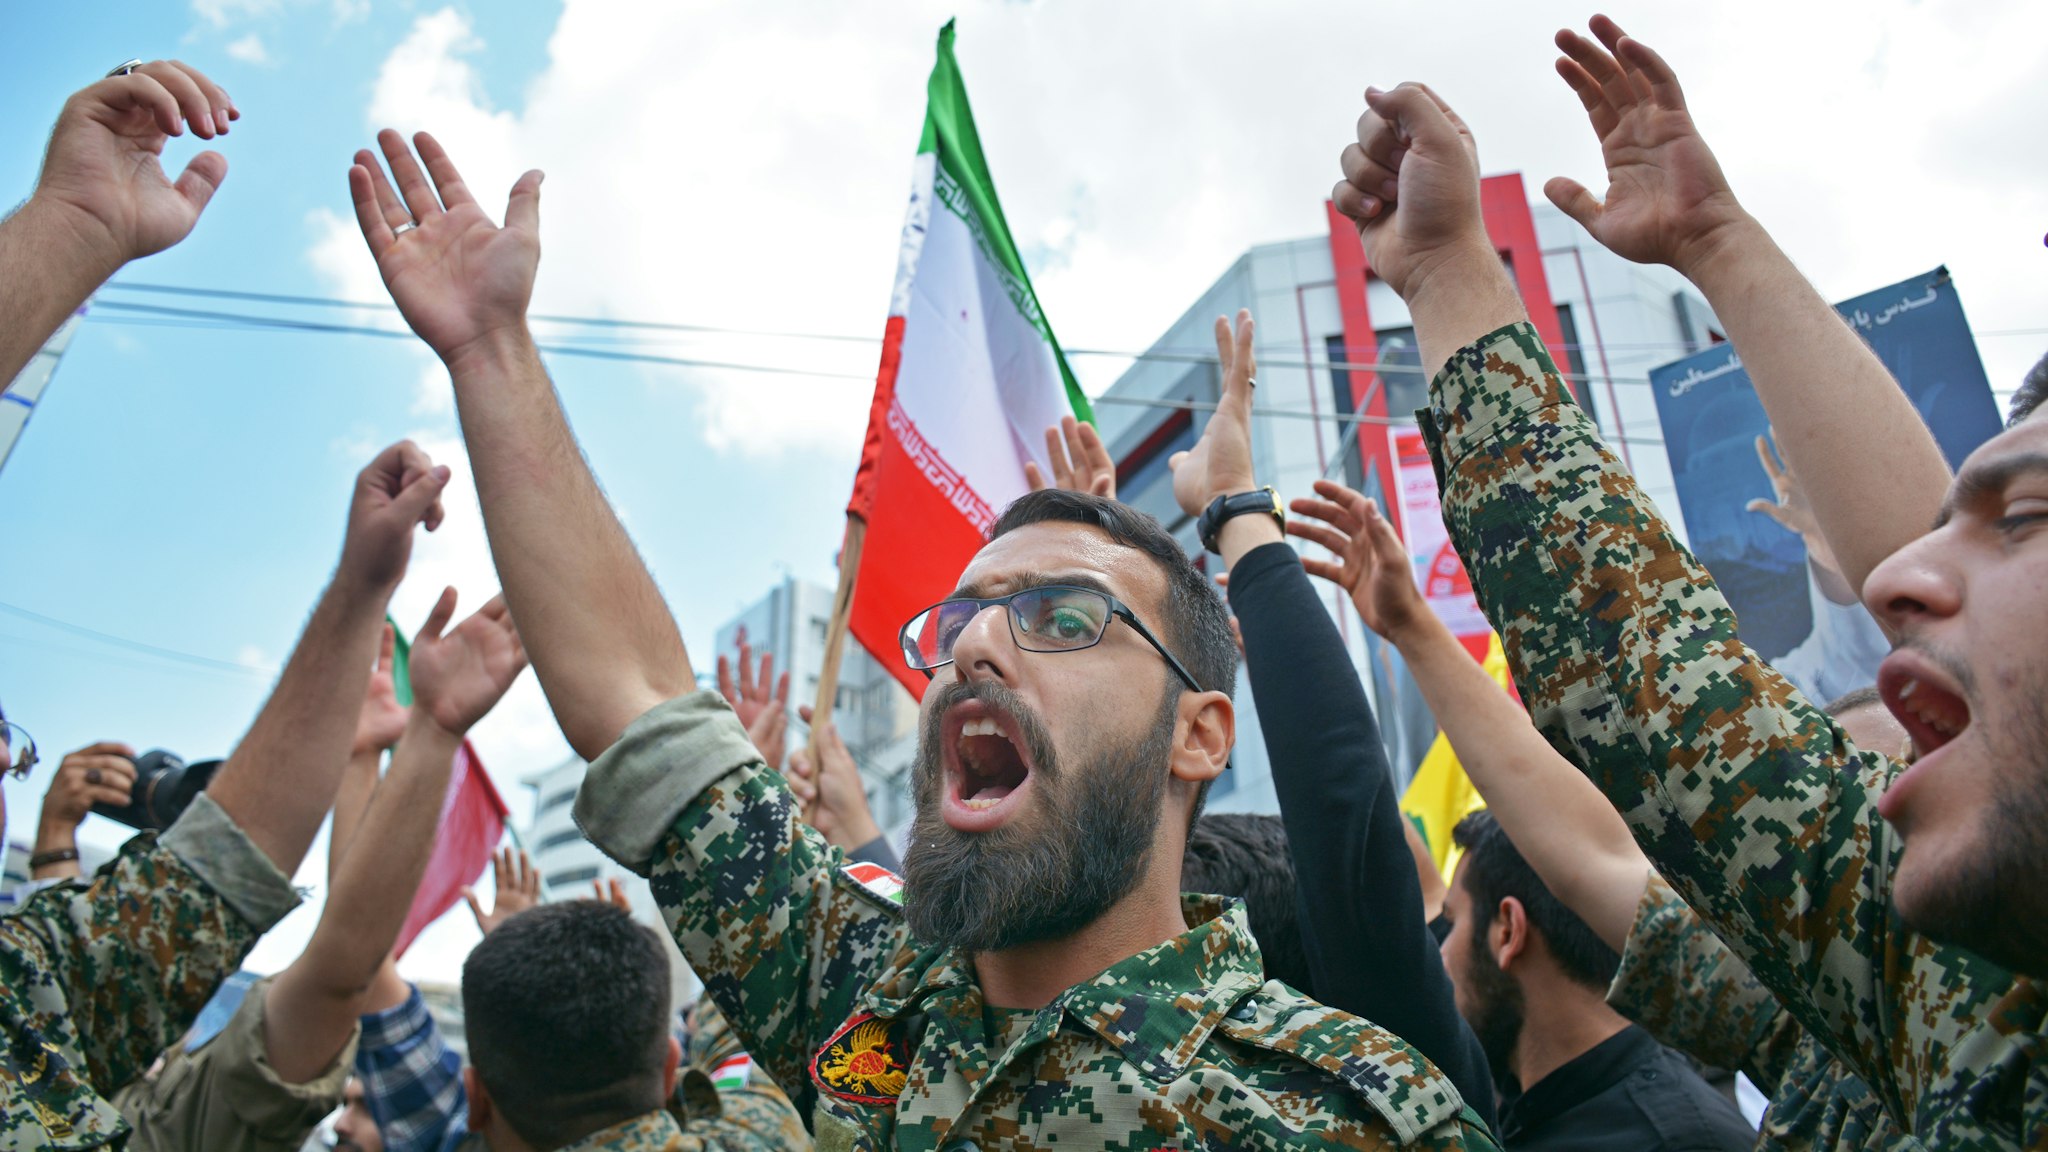 A group of members of Basij paramilitary force, affiliated to the Revolutionary Guard, chant slogan during the annual Quds, or Jerusalem Day rally in Tehran, Iran, Friday, May 31, 2019.